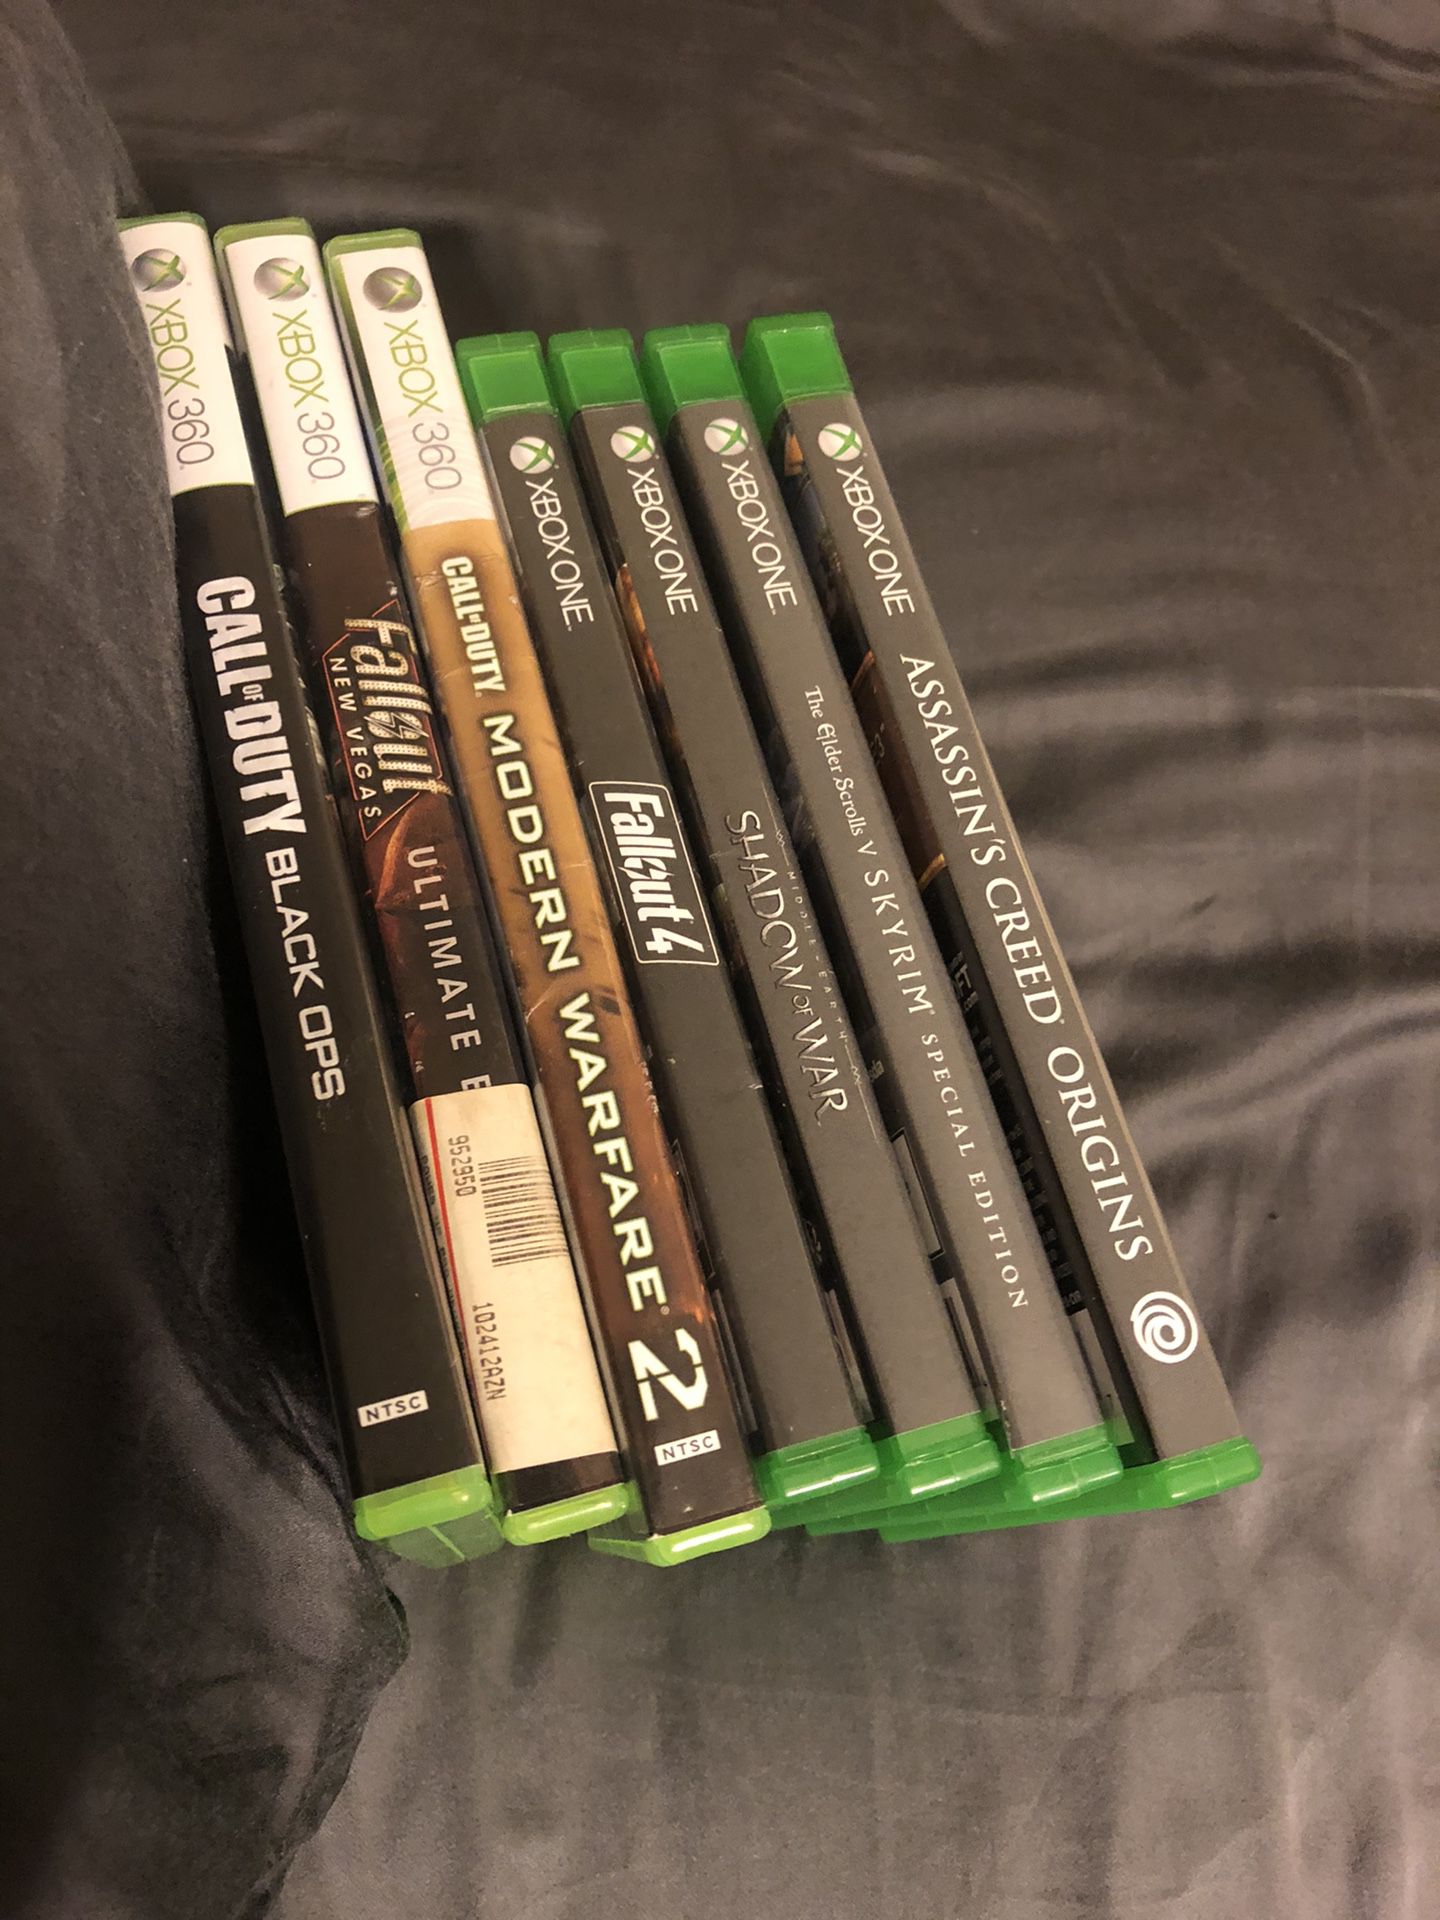 Xbox One and Xbox 360 games